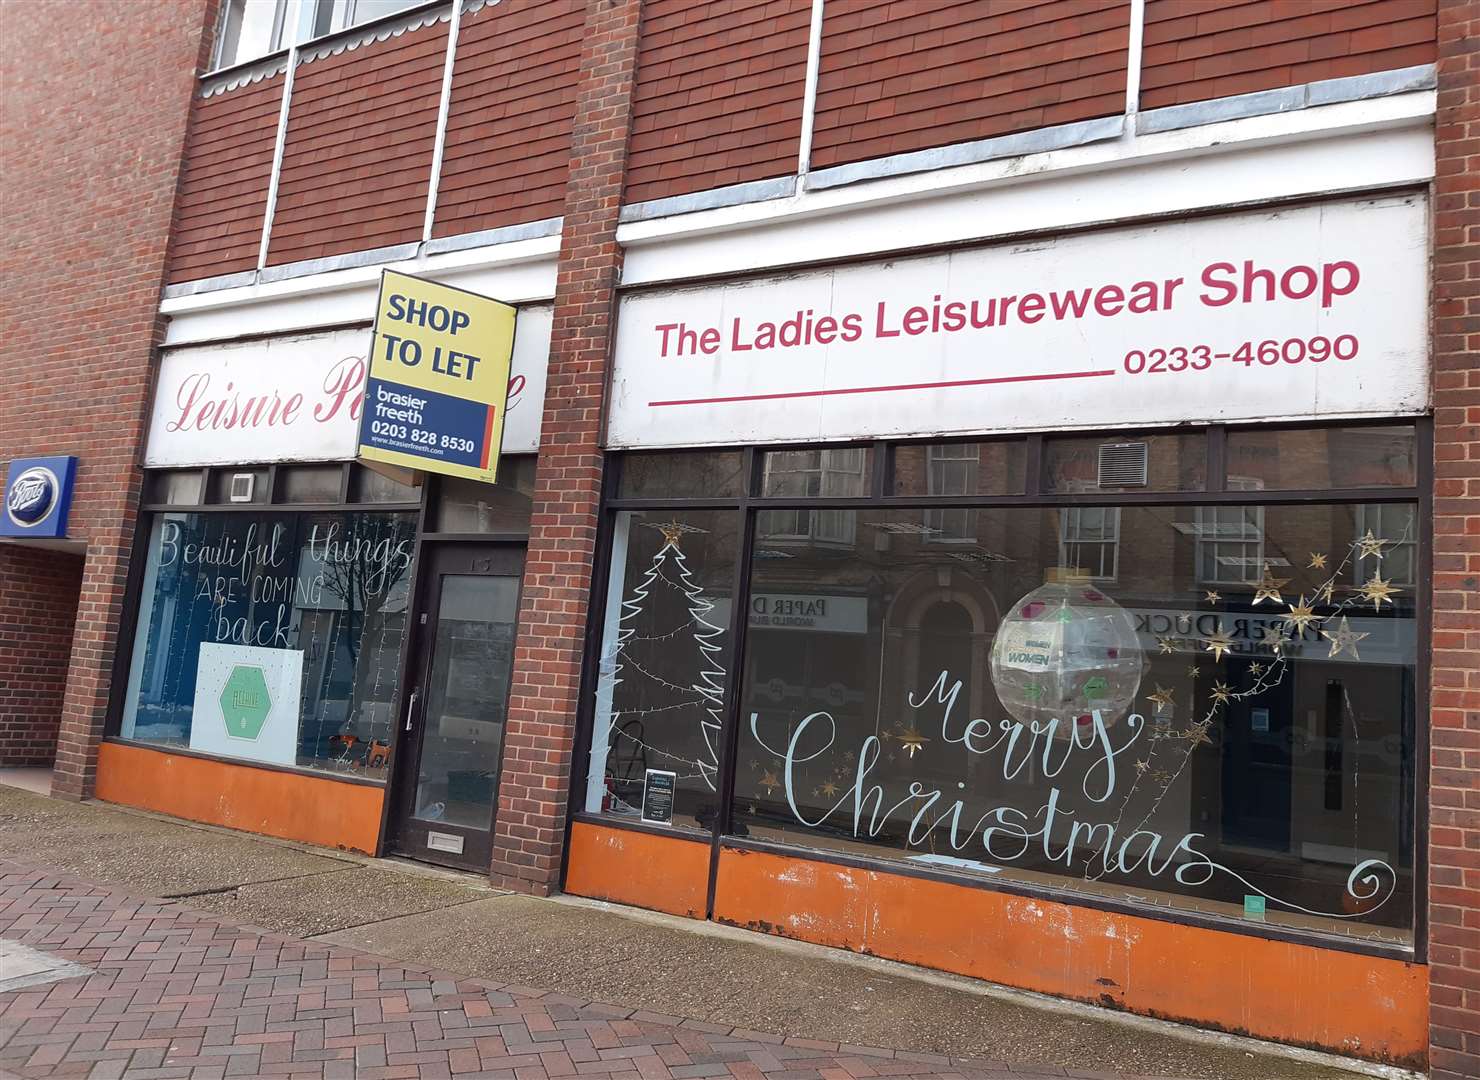 The former Save the Children shop will get a complete makeover ahead of the move